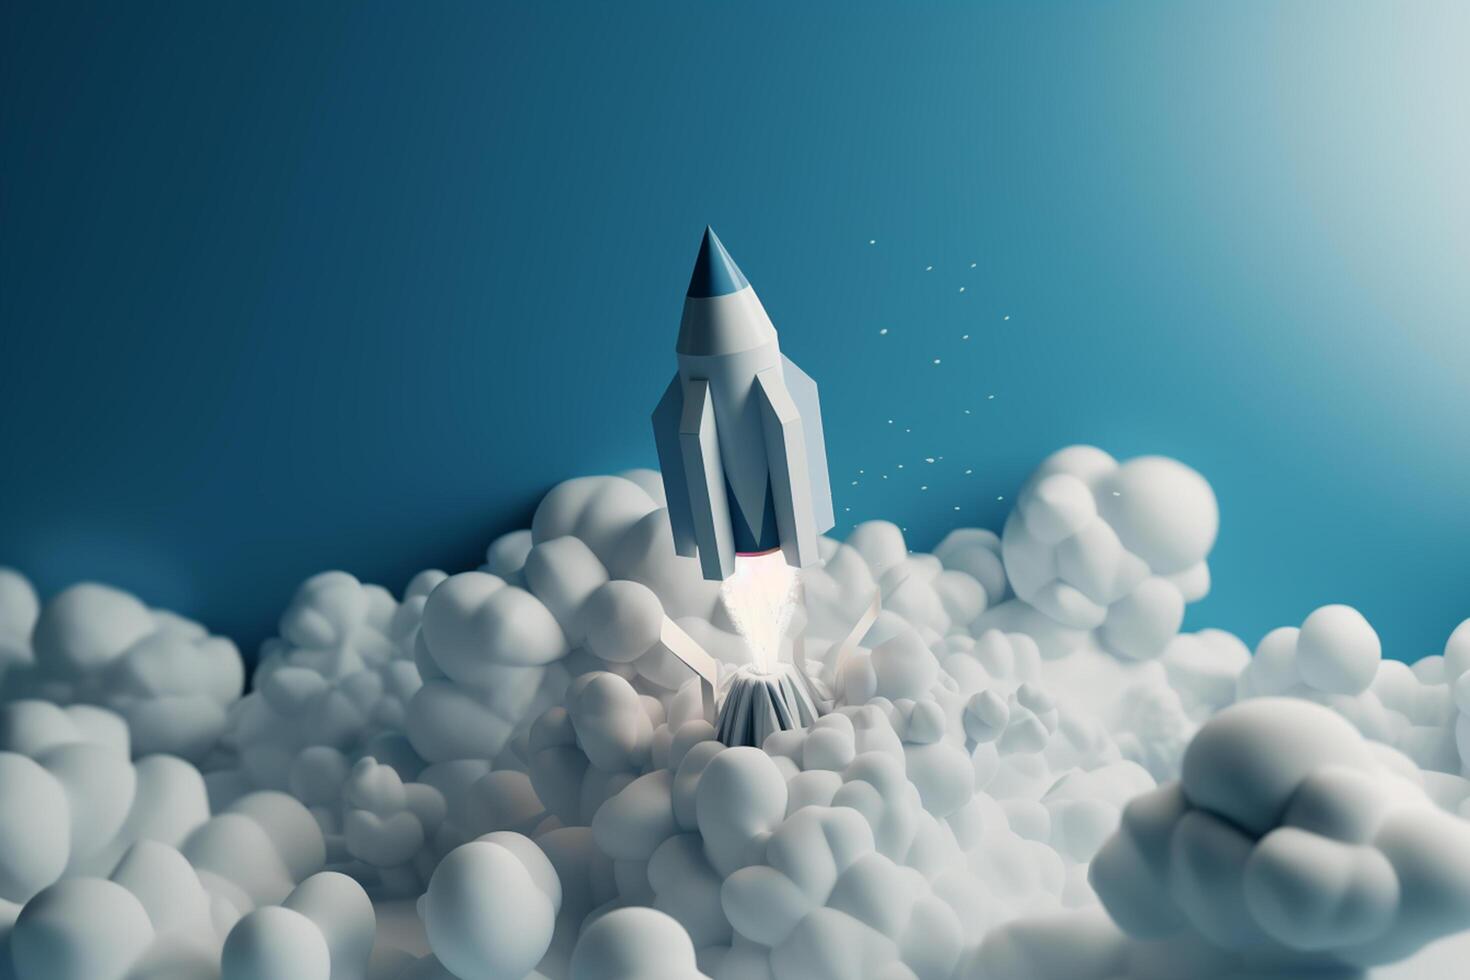 White Rocket Model Flying Through Cloudy Blue Skies as a Symbol of Startup Success and Innovation photo